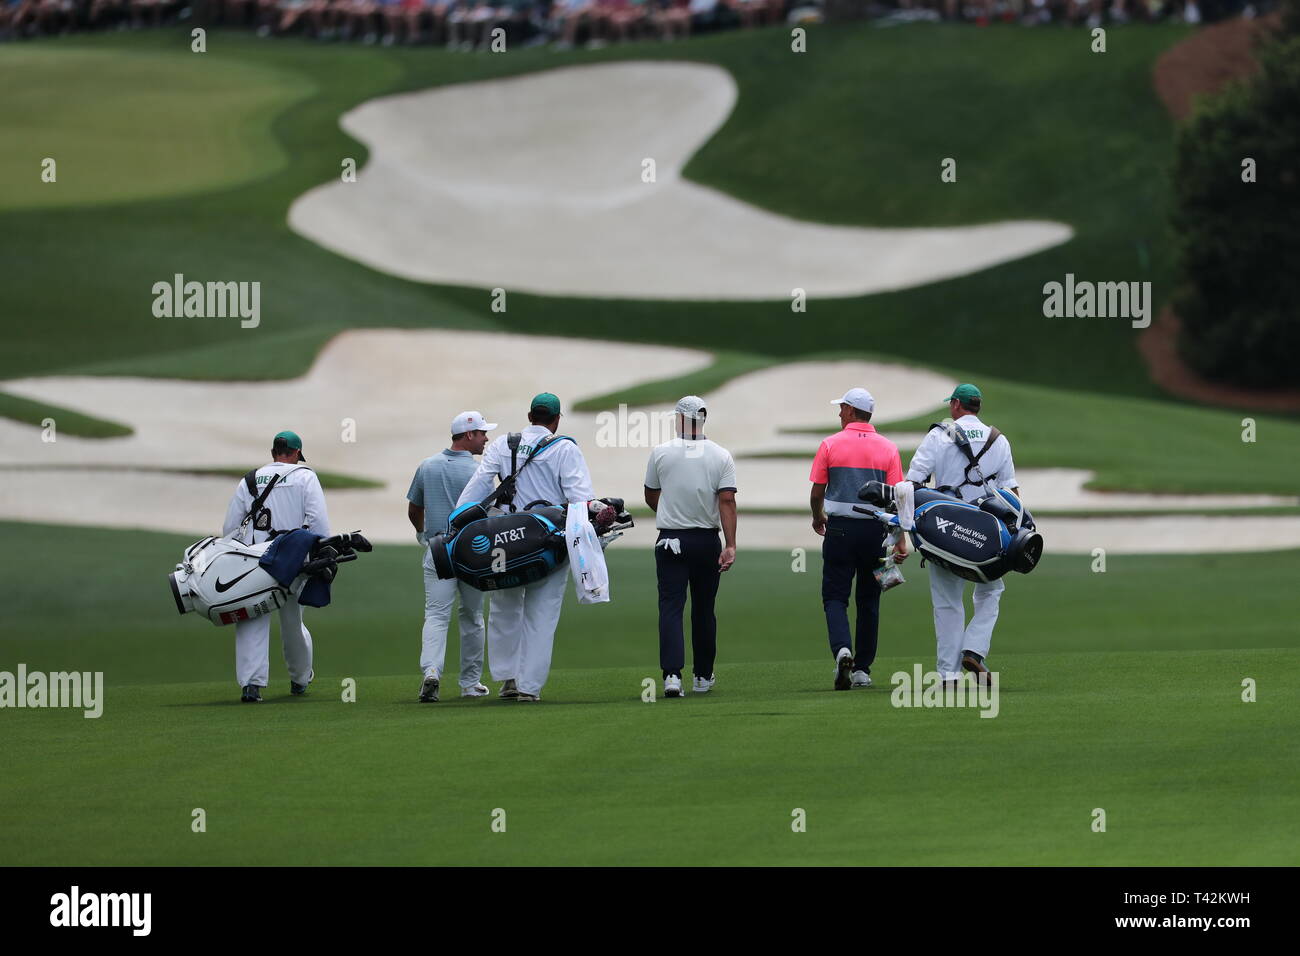 USA's Jordan Spieth on the 10th hole during the second round of the 2019 Masters golf tournament at the Augusta National Golf Club in Augusta, Georgia, United States, on April 12, 2019. (Photo by Koji Aoki/AFLO SPORT) Stock Photo